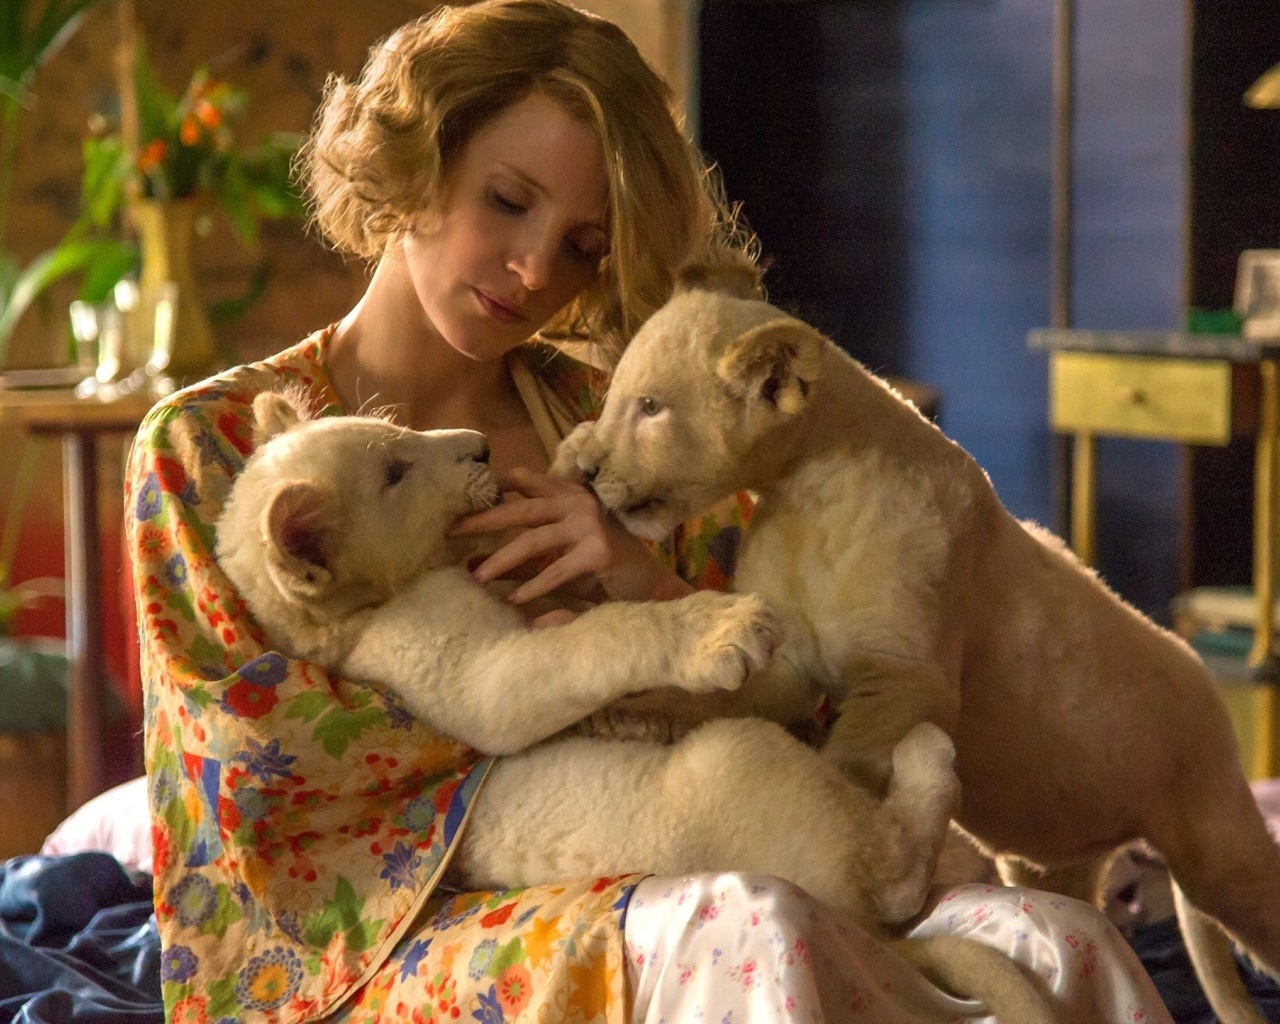 Sfondi The Zookeepers Wife Film with Jessica Chastain 1280x1024